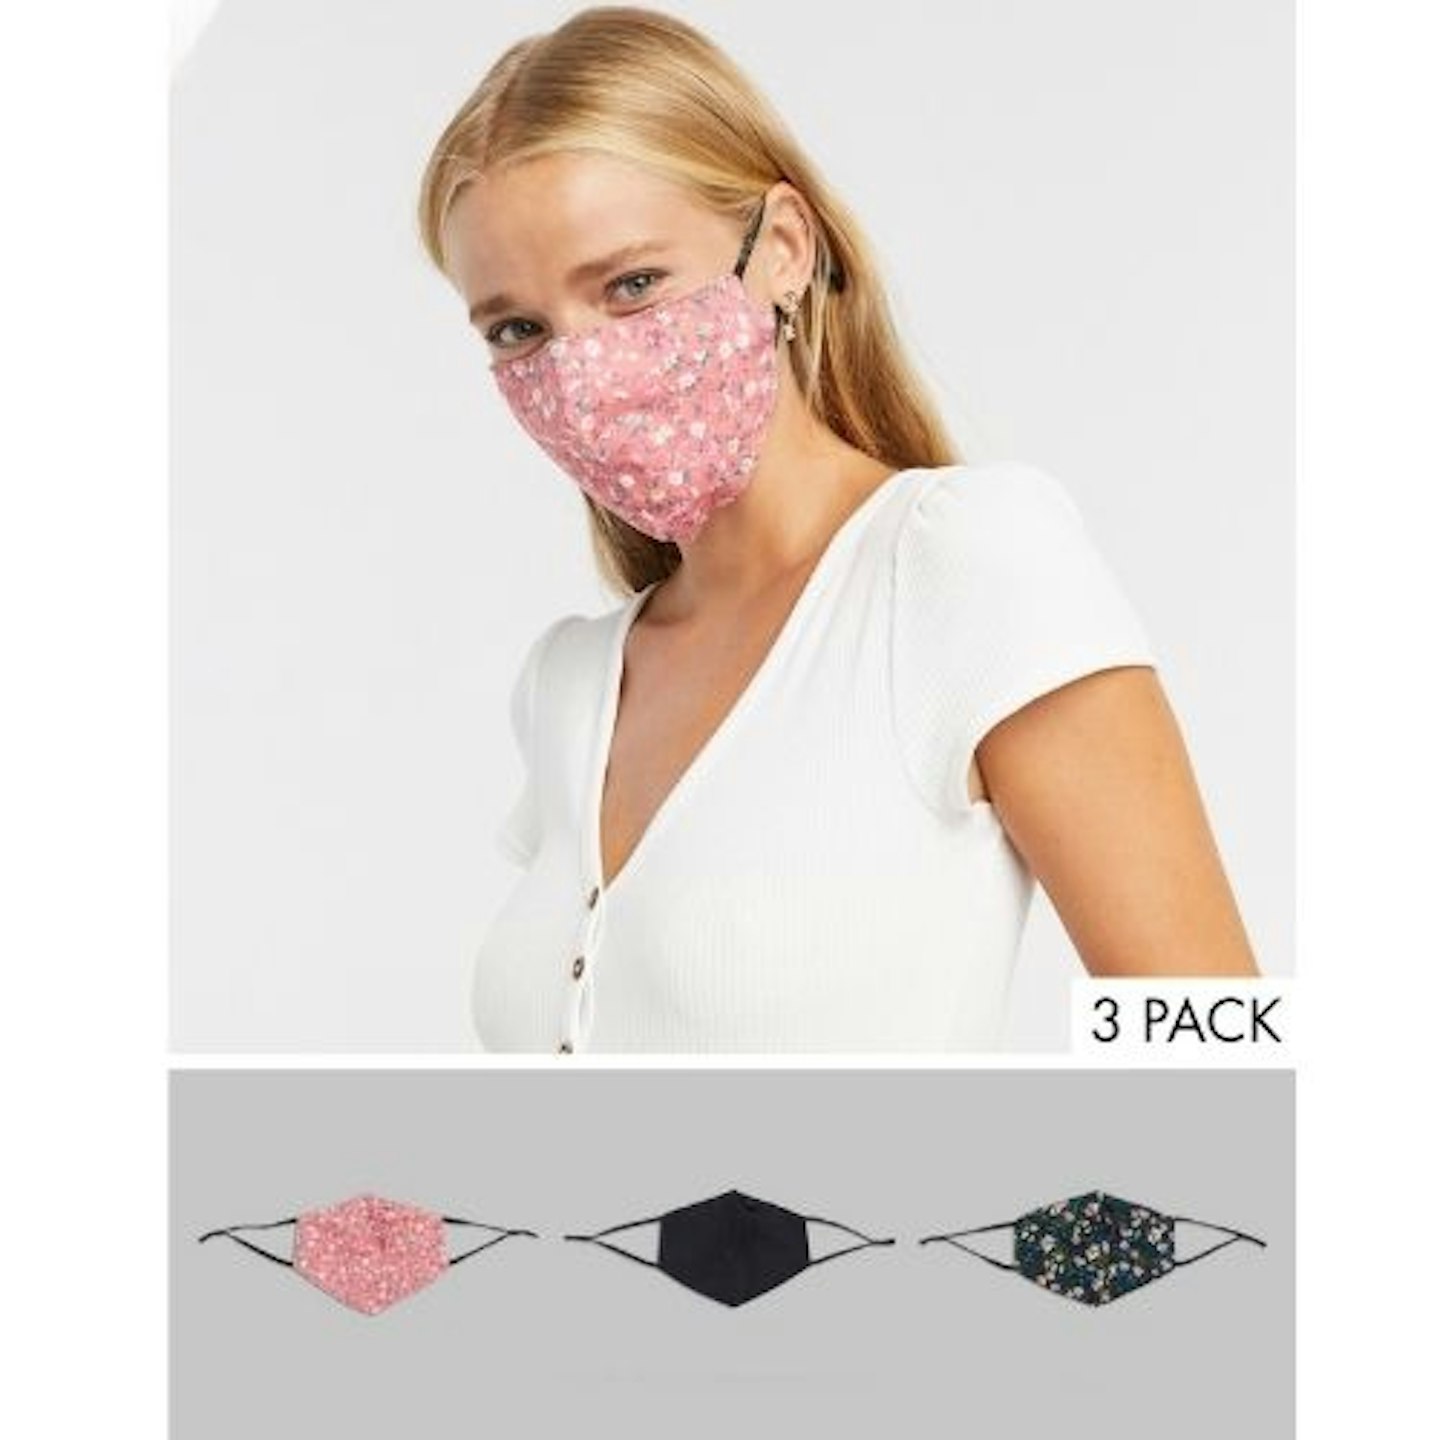 ASOS DESIGN 3 pack face covering in floral print and plain black